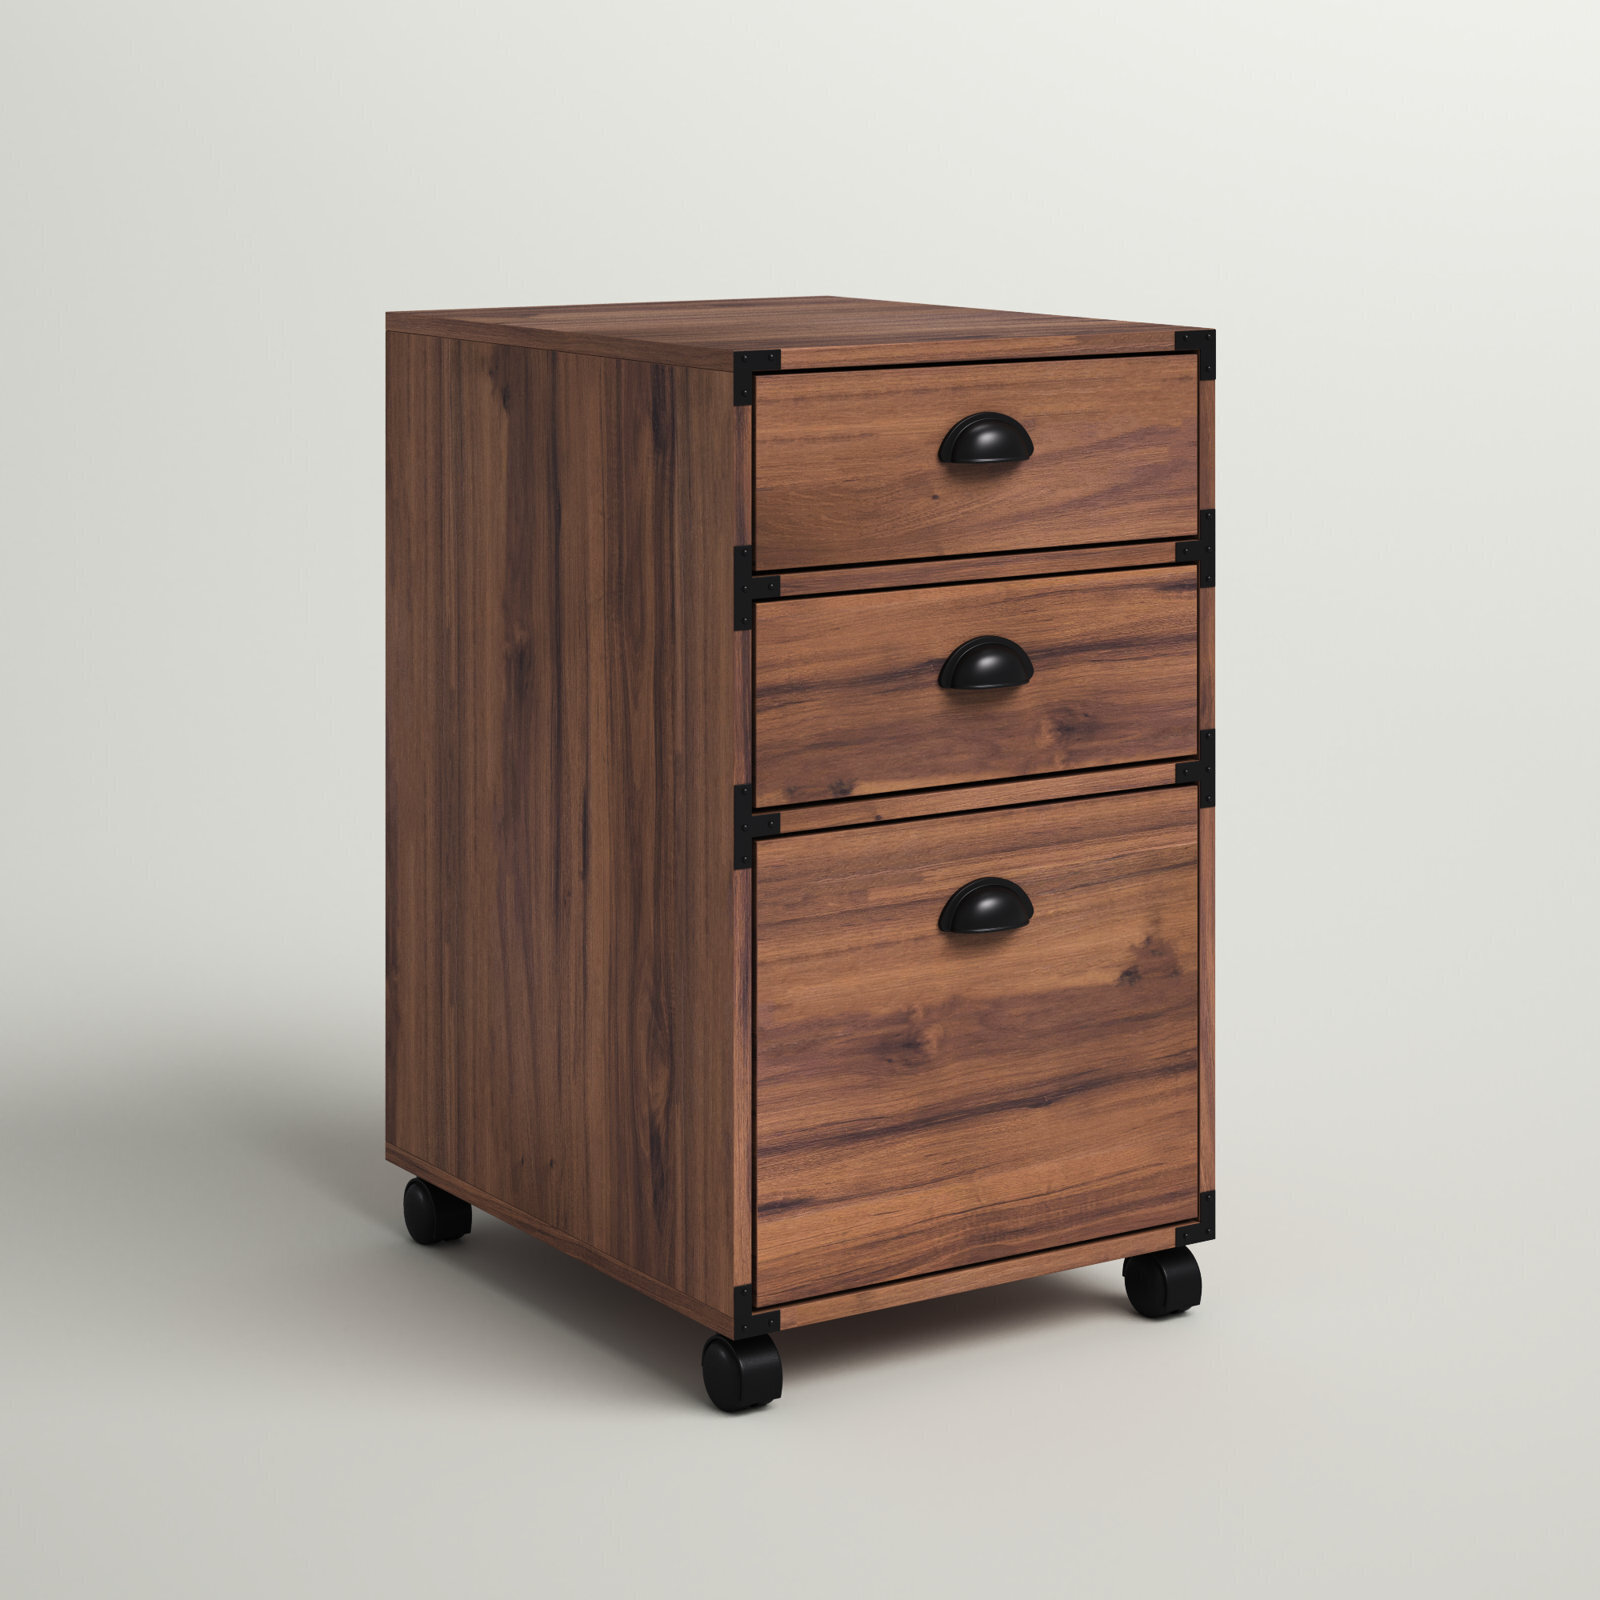 Filing cabinet with crescent handles